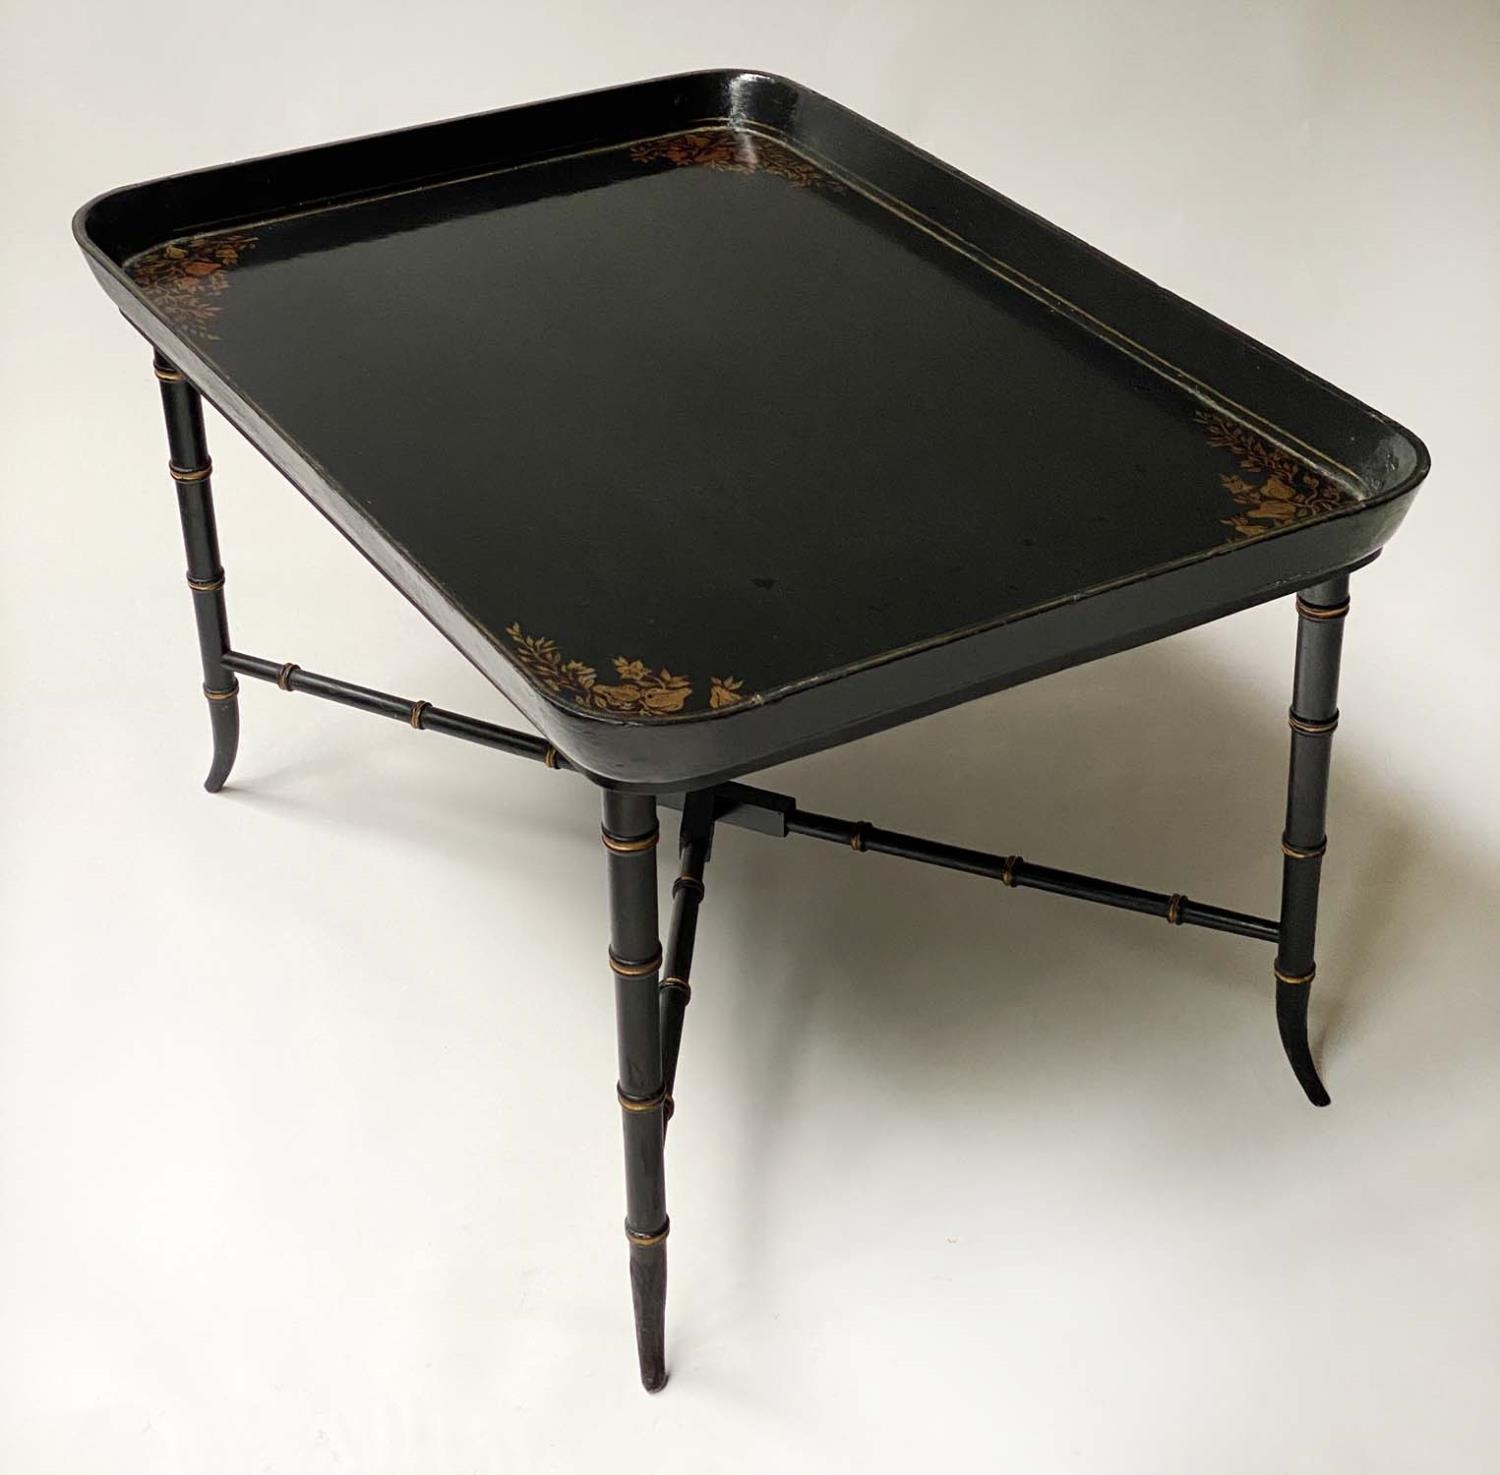 TRAY ON STAND, 83cm x 57cm x 49cm H, Regency style papier-mâché black lacquered and gilt - Image 2 of 7